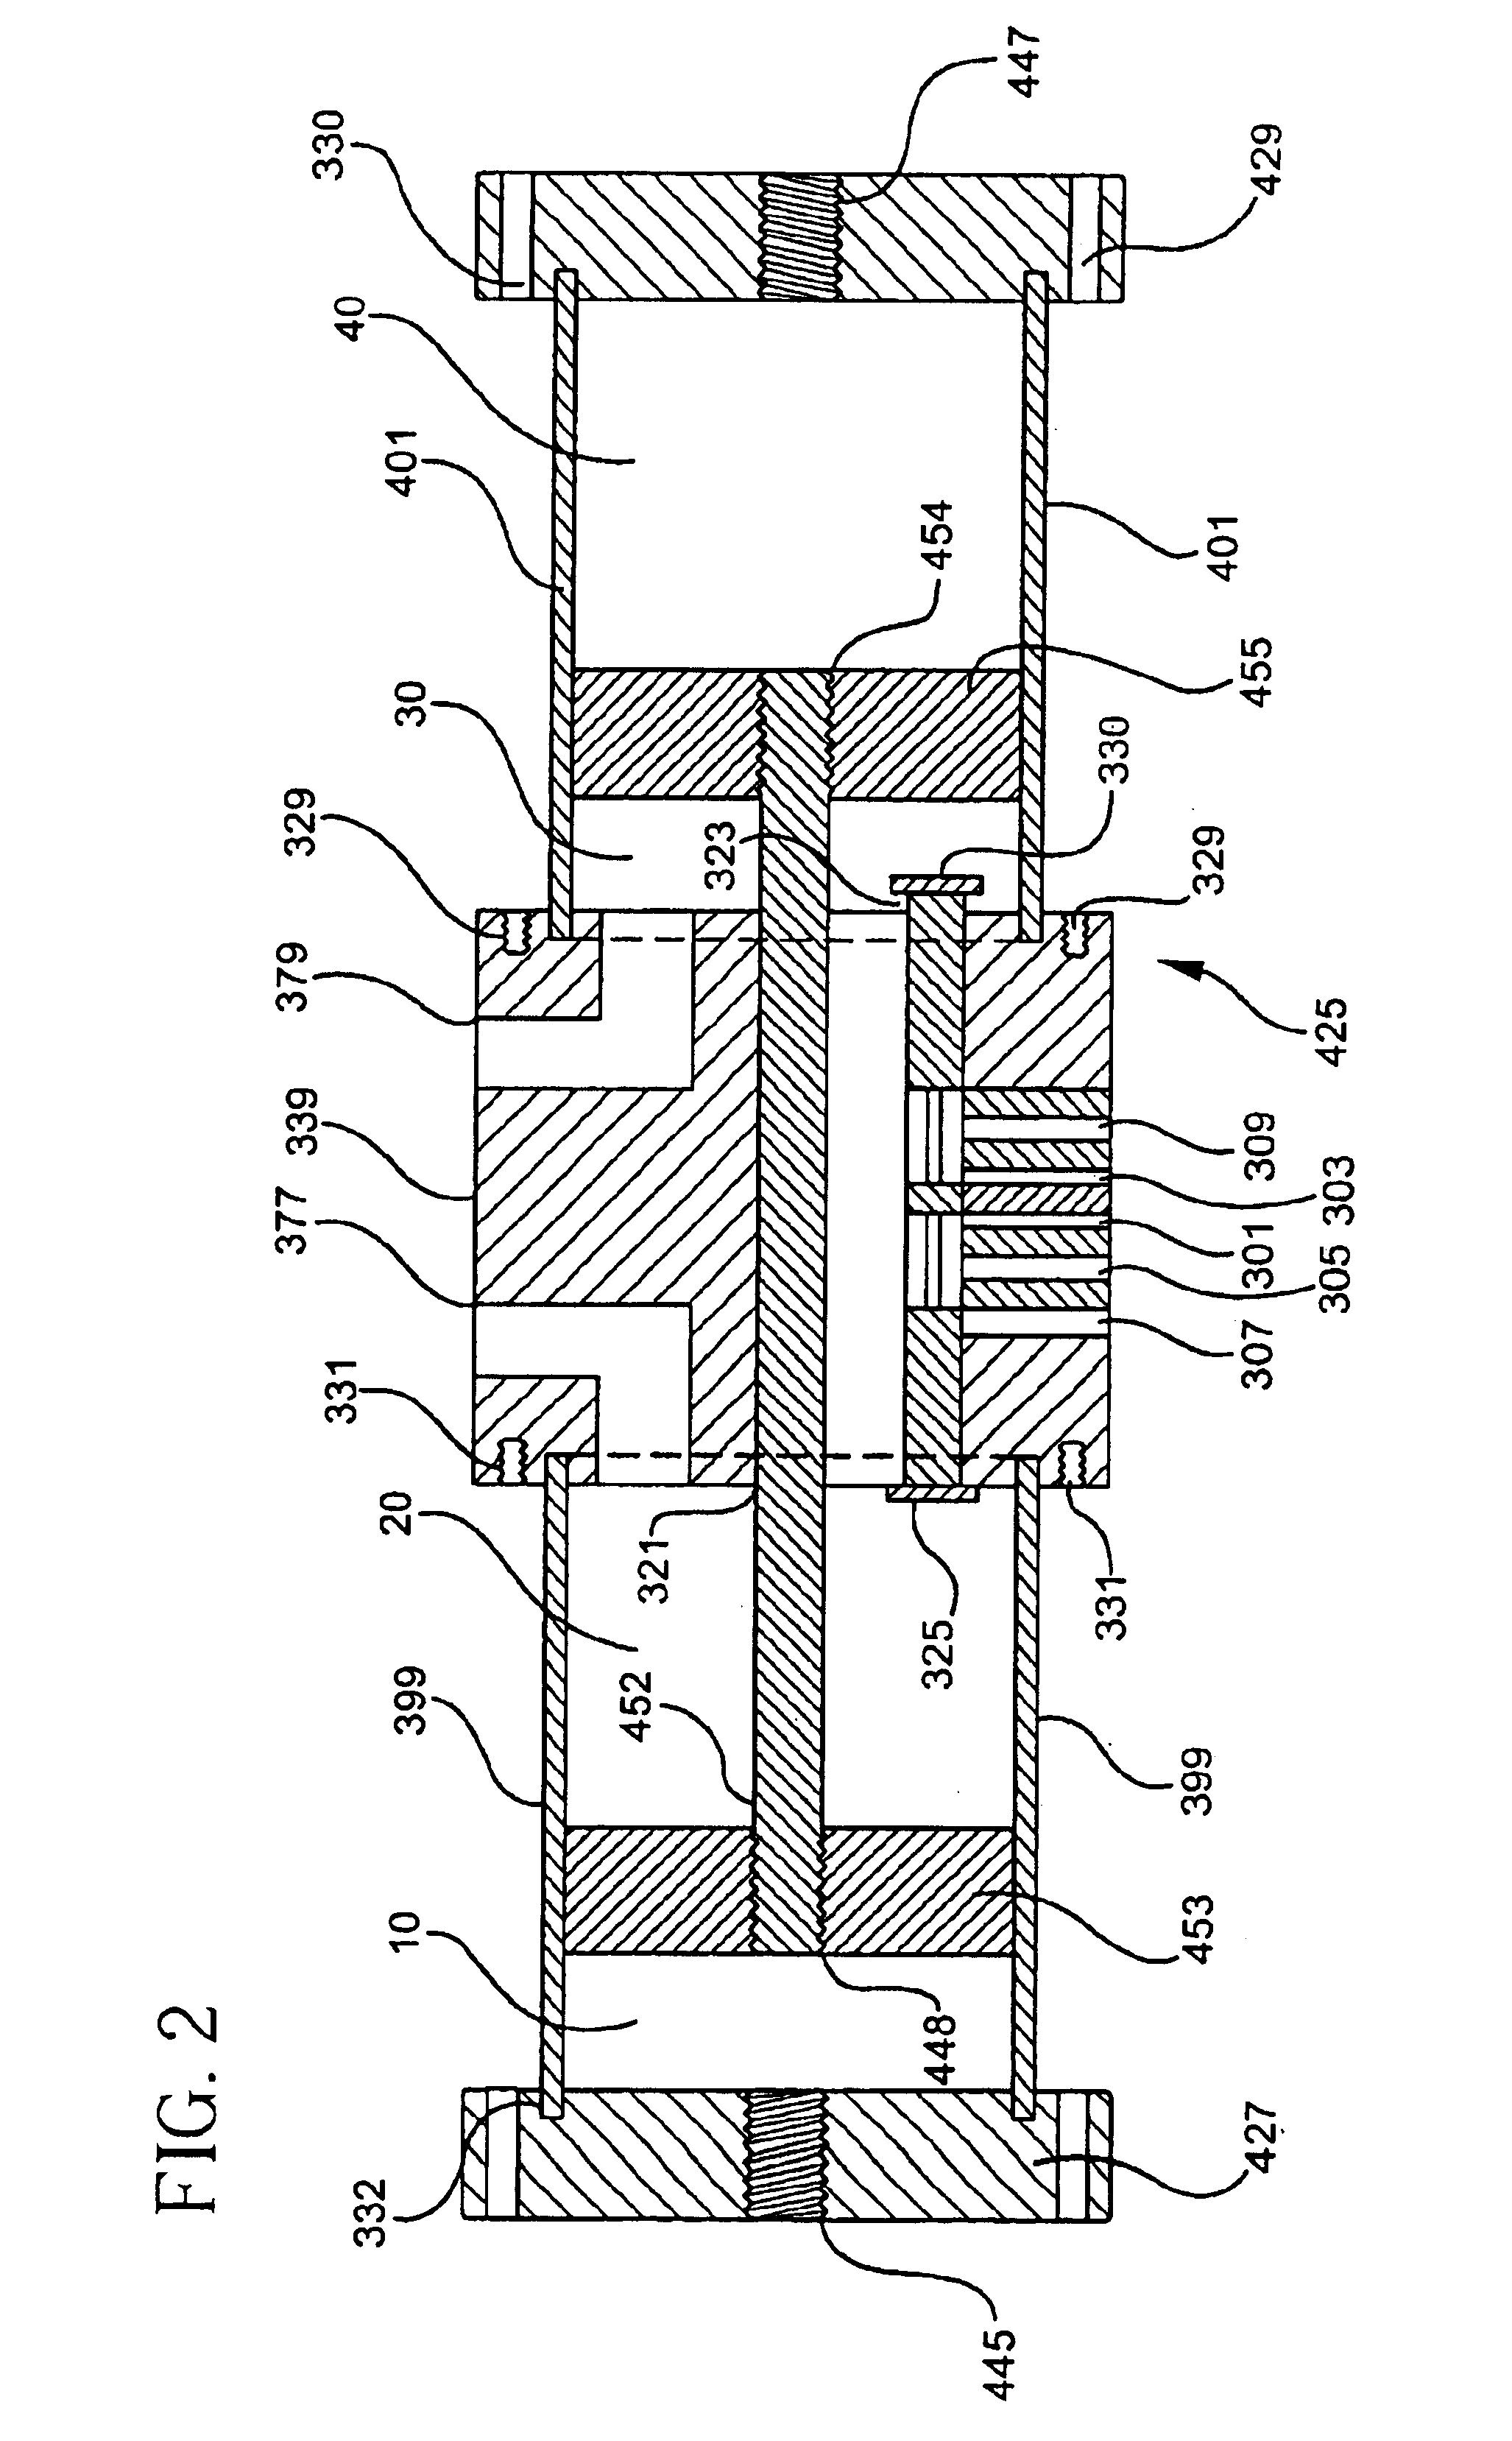 Pilot valve operated reciprocating fluid exchange device and method of use